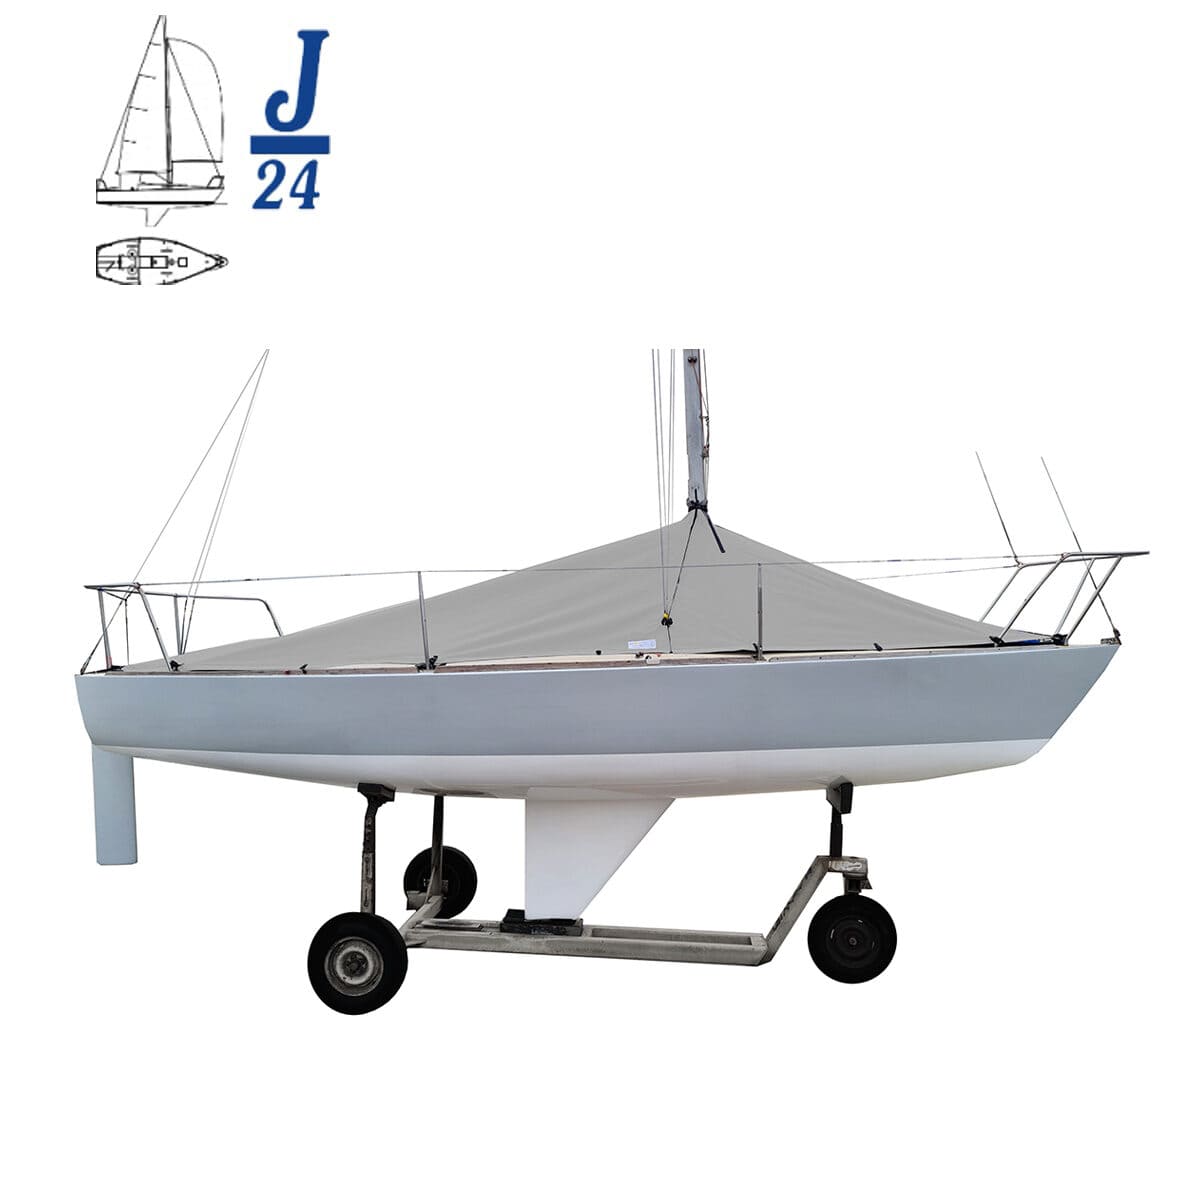 J24 with deck with Mast